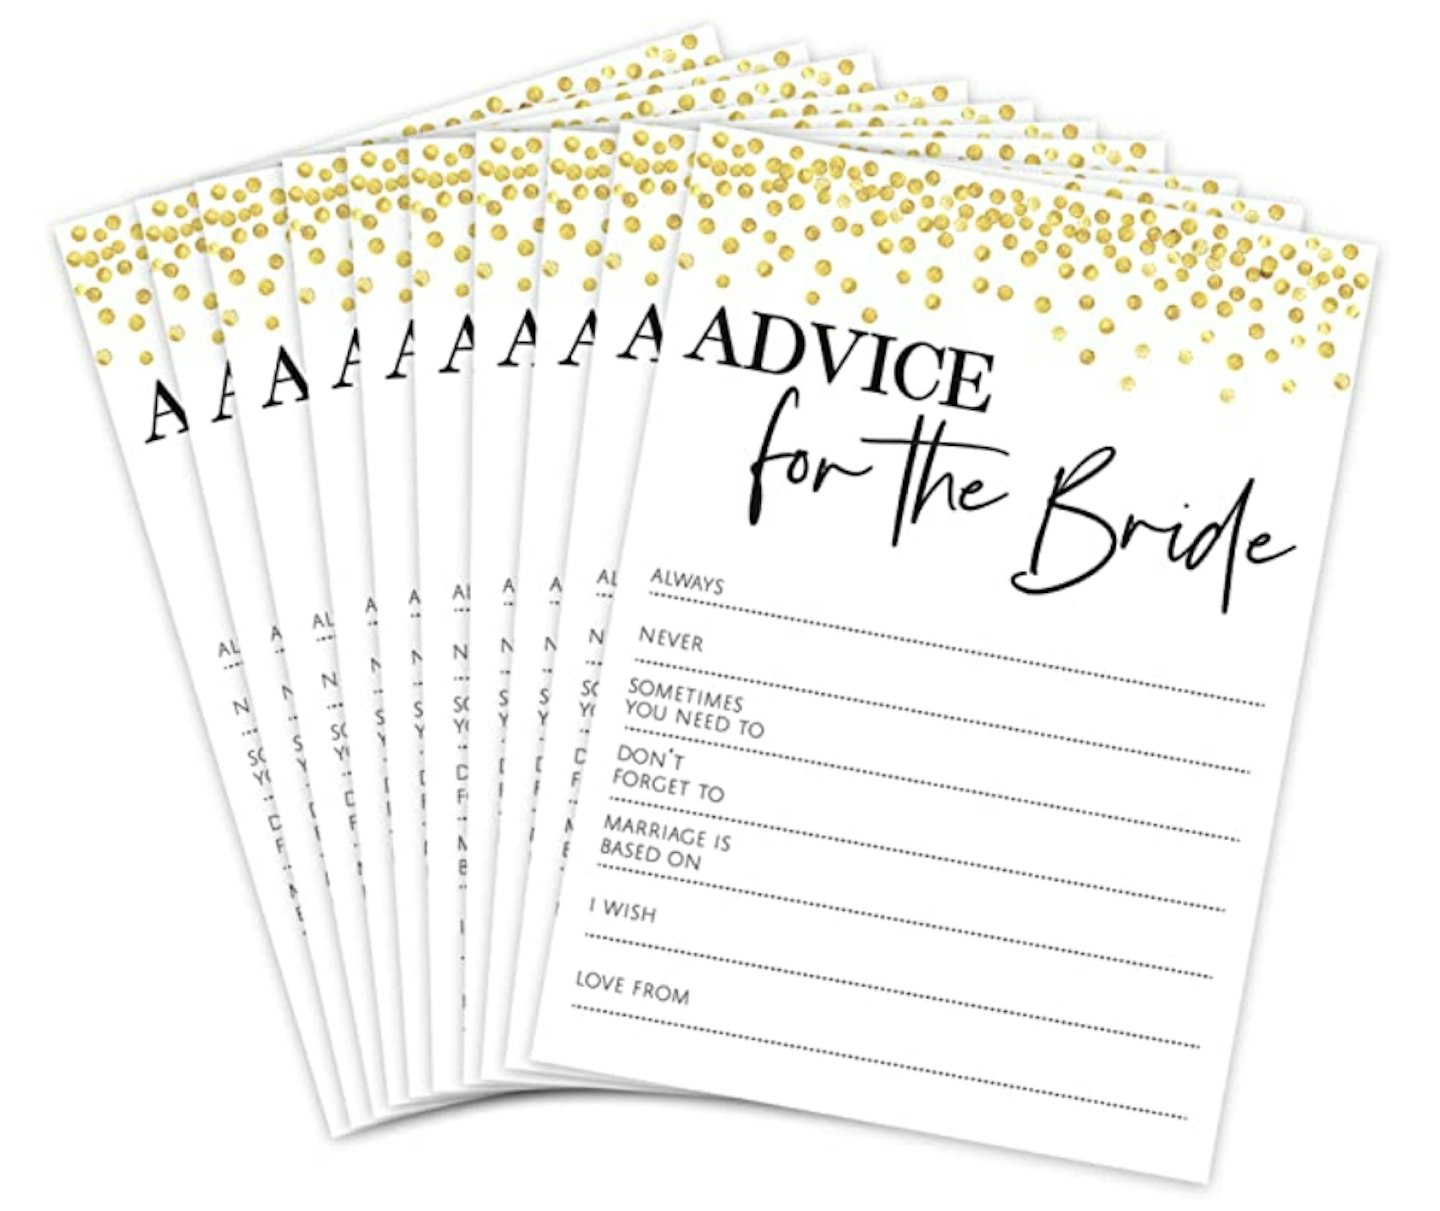 Huxters Hen Party Accessories – 20 Pcs Advice for The Bride Card Games